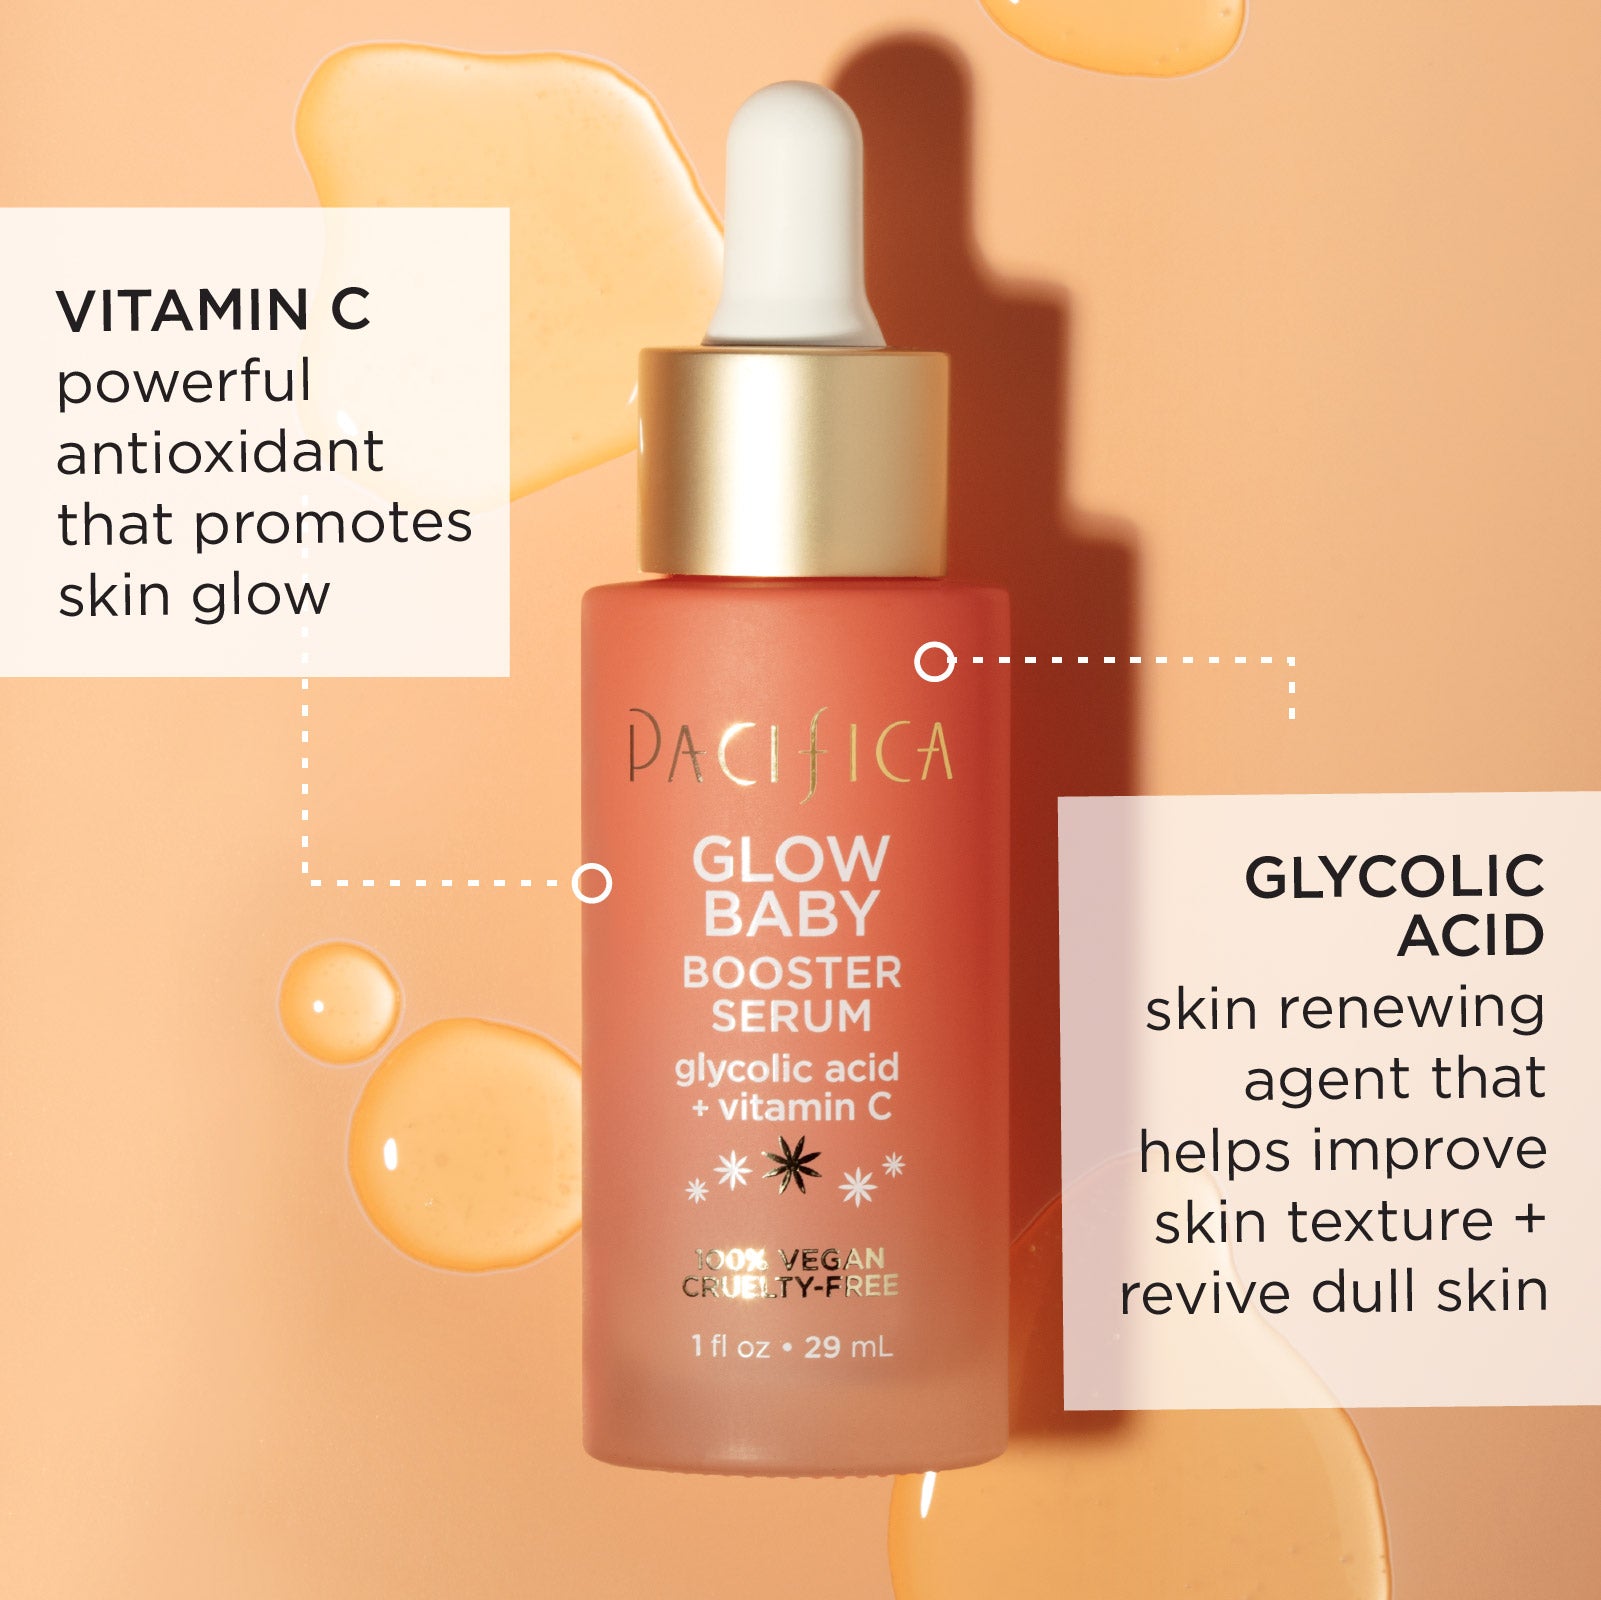 Vitamin C - powerful antioxidant that promotes skin glow. Glycolic Acid - skin renewing agent that helps improve skin texture + revive dull skin.